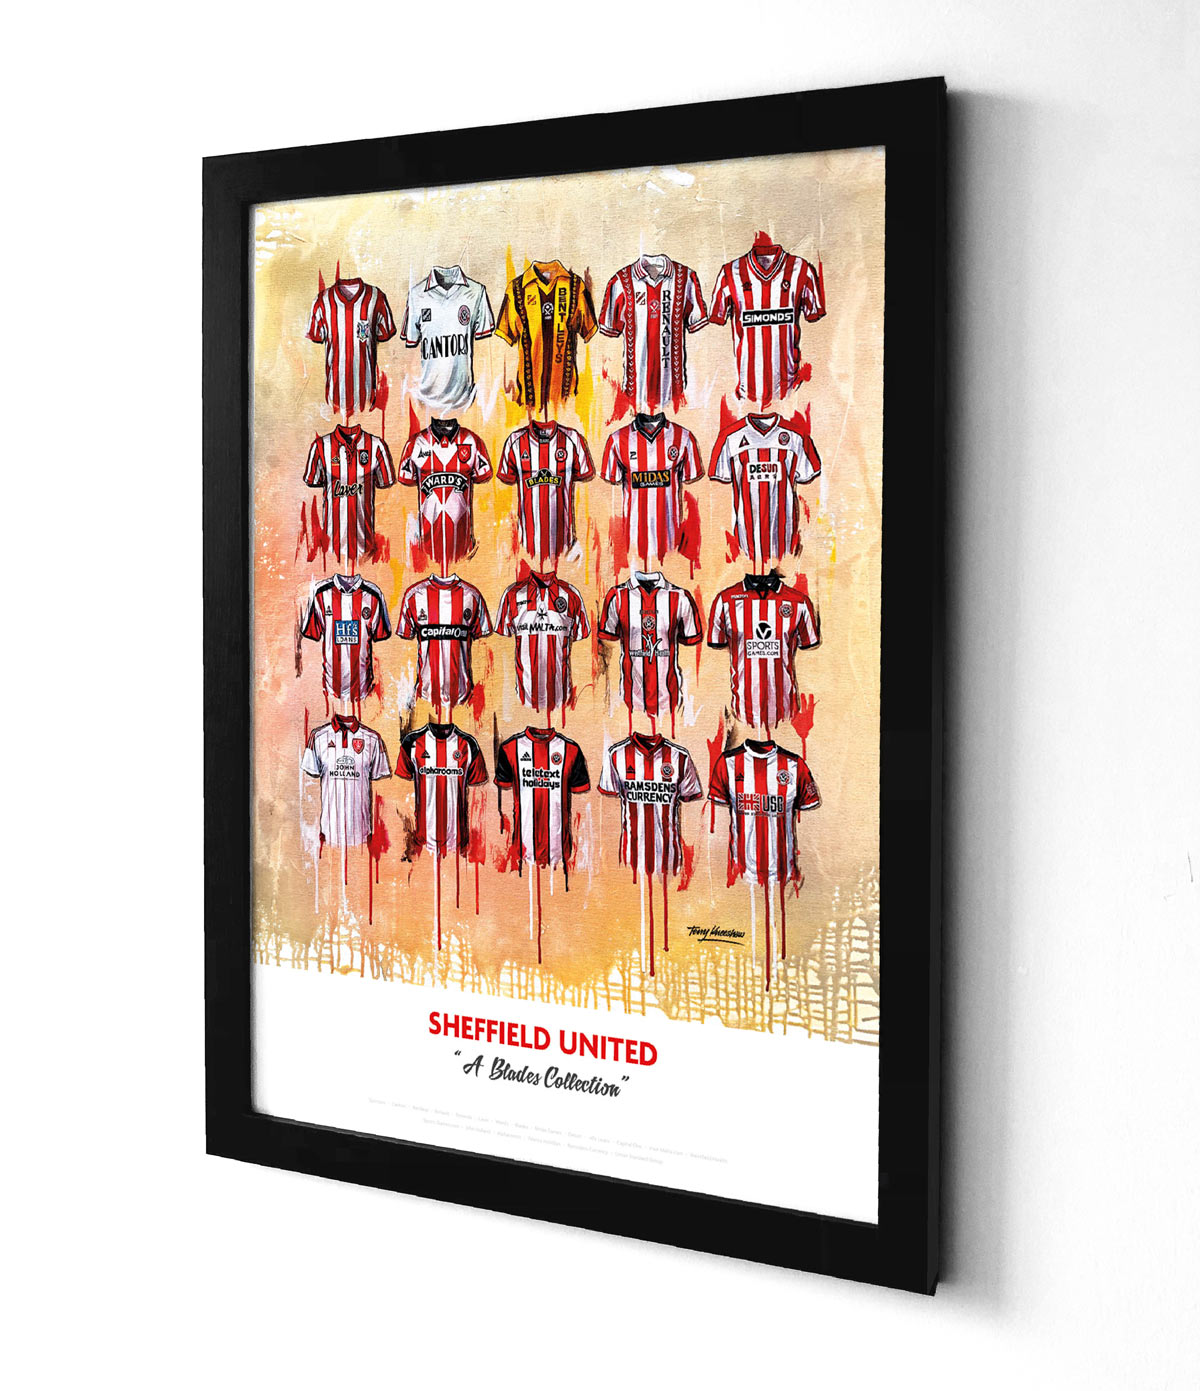 A limited edition A2 print by artist Terry Kneeshaw, featuring 20 iconic jerseys from the Sheffield United football team's history. The jerseys are arranged in a 4x4 grid pattern and are labelled with the corresponding year and design. The artwork has a vintage feel, with muted colours and a slightly distressed texture. The jerseys include a mix of red and white stripes, as well as predominantly red and white designs. Perfect for any Sheffield United fan.